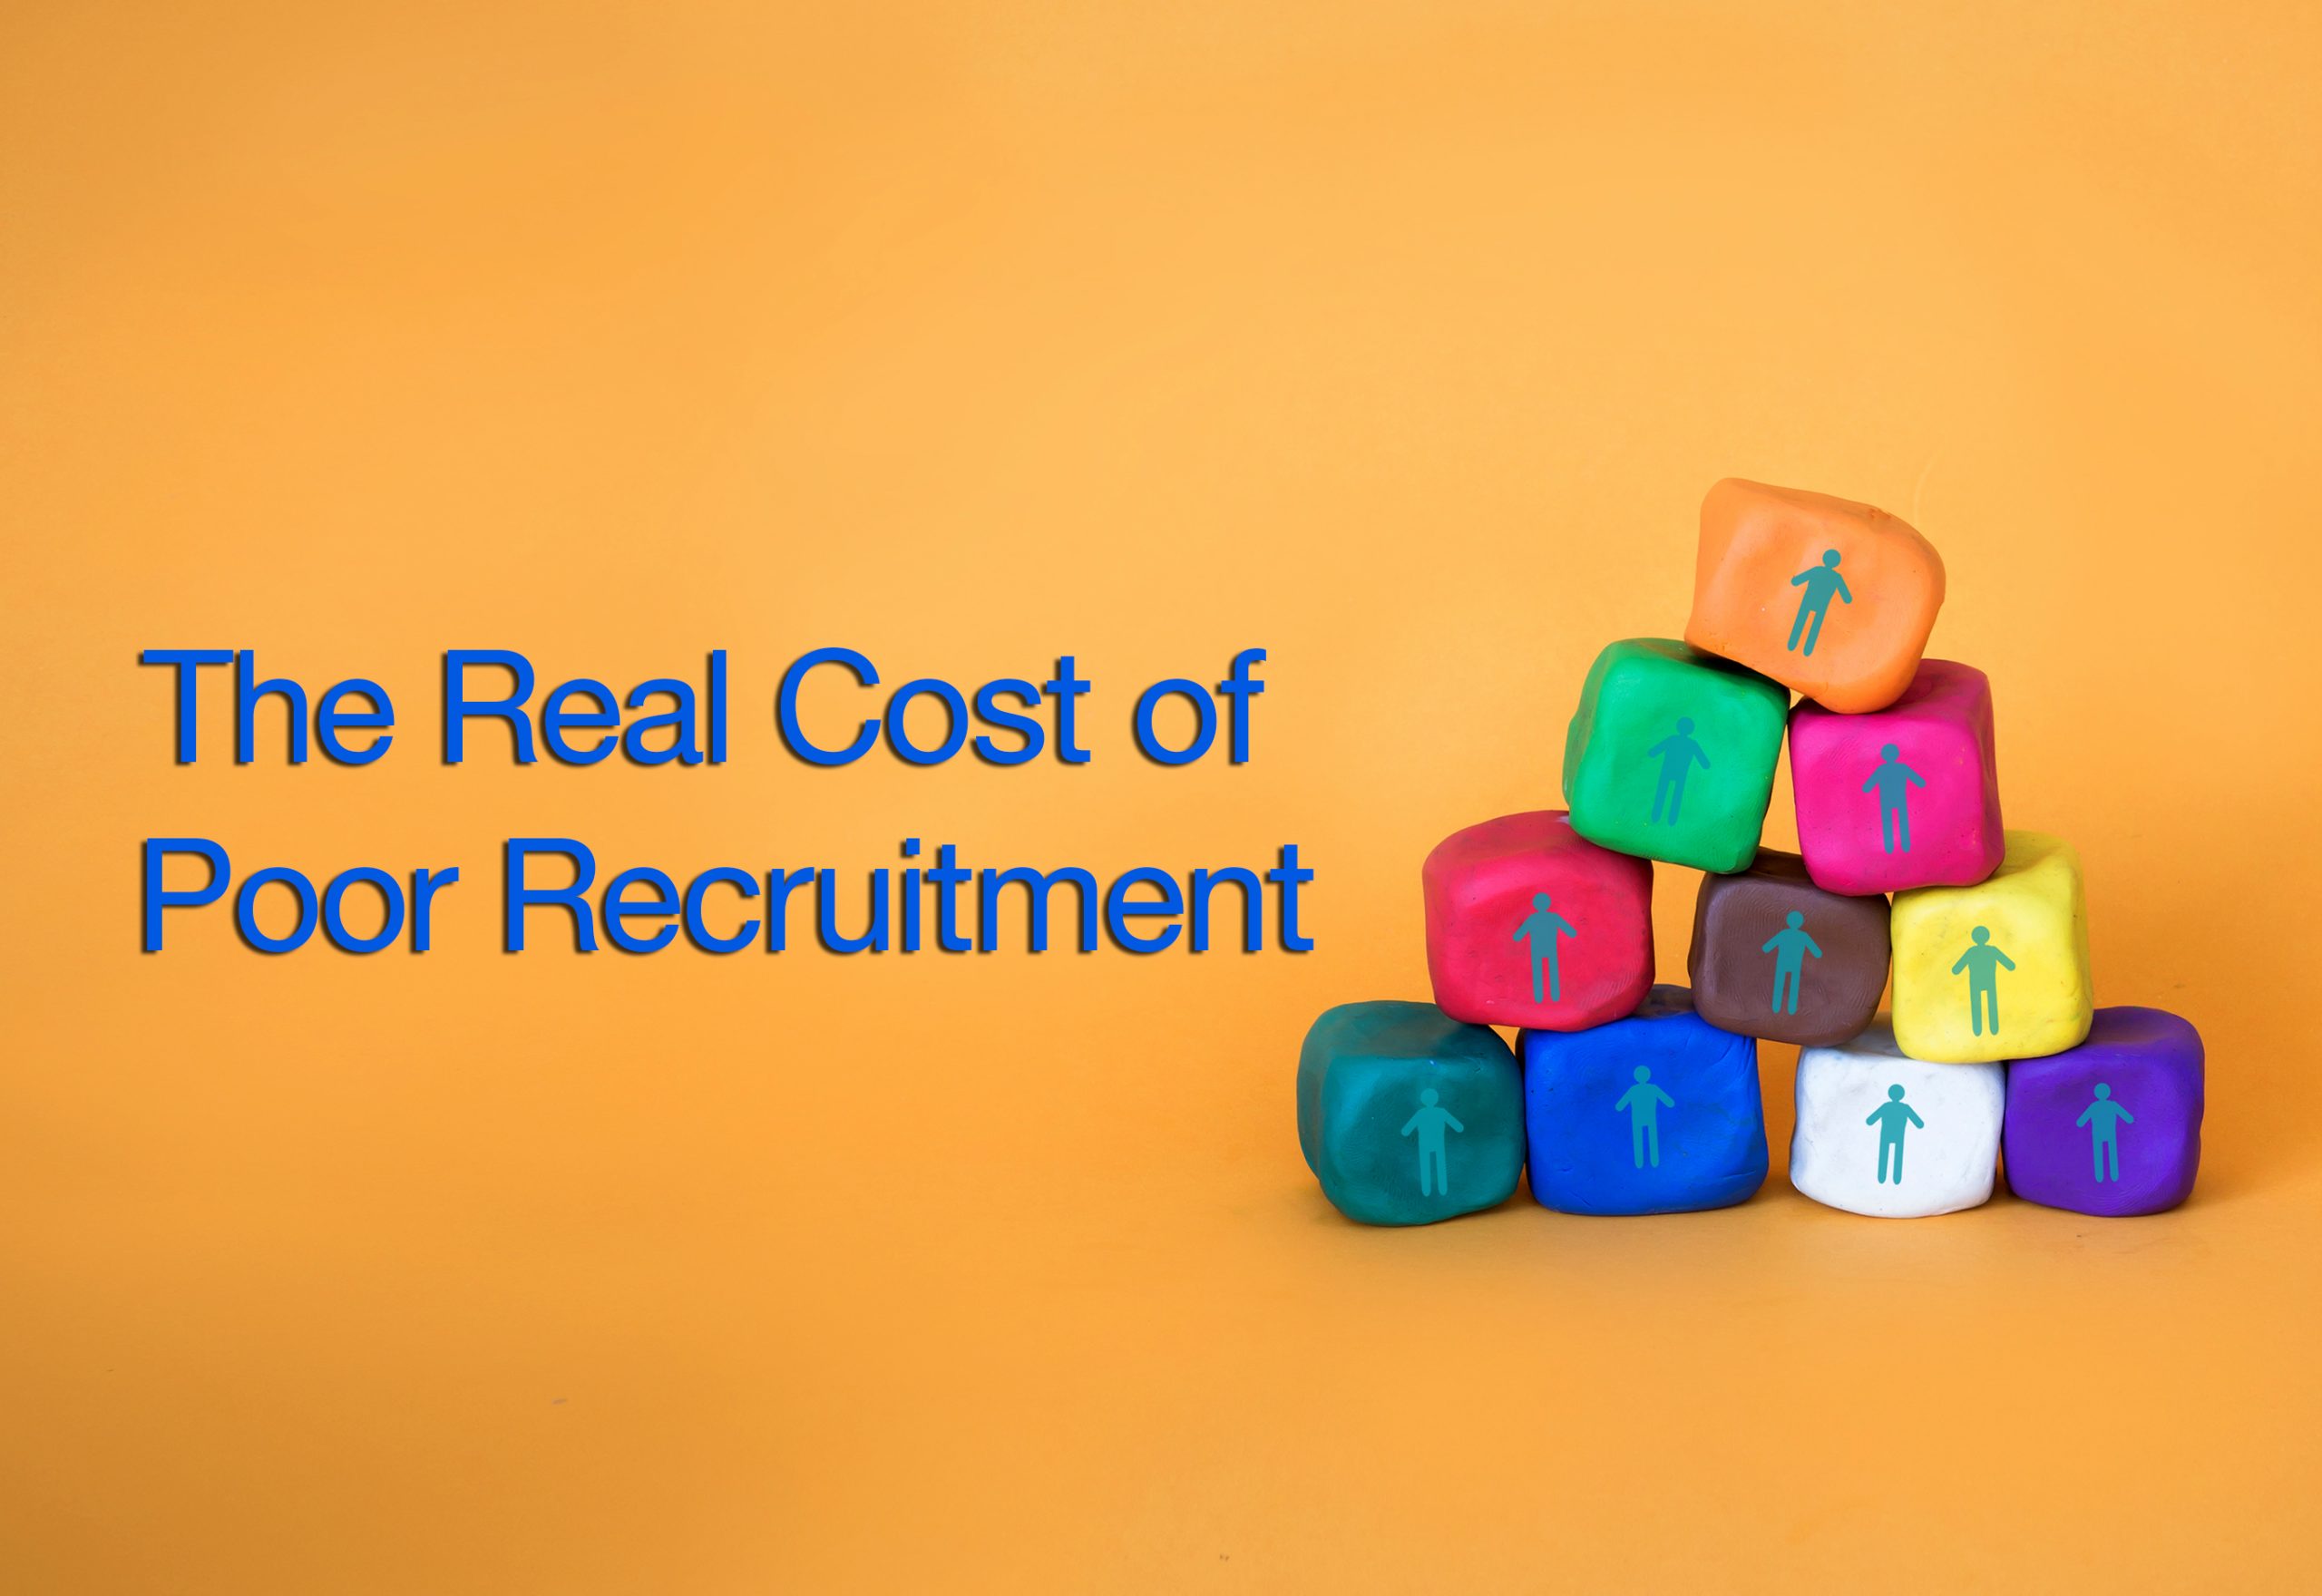 The Real Cost of Poor Recruitment